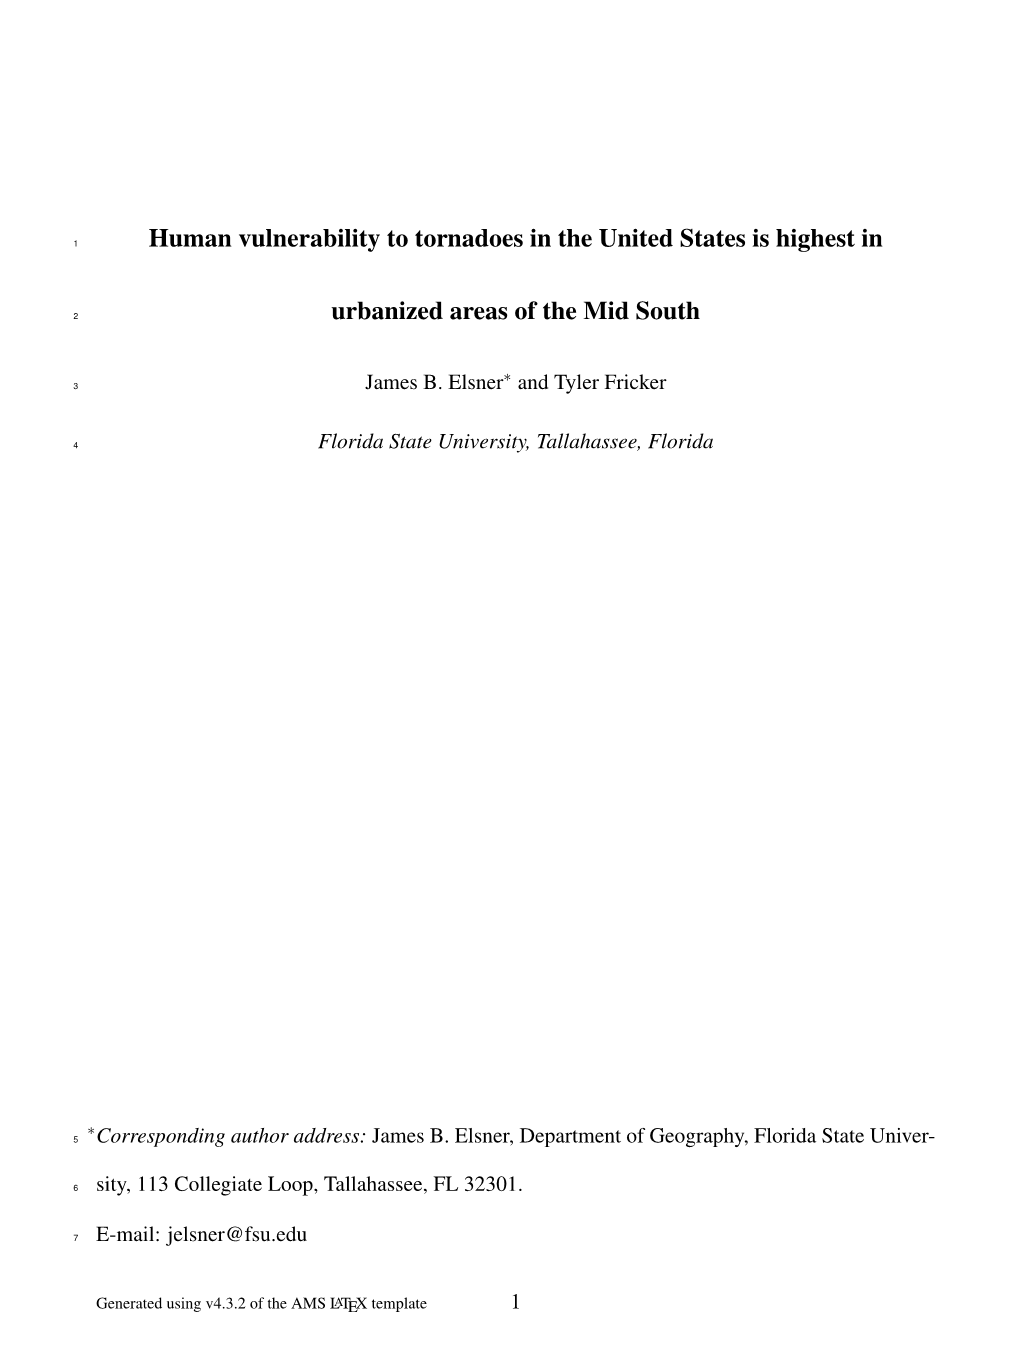 Human Vulnerability to Tornadoes in the United States Is Highest In